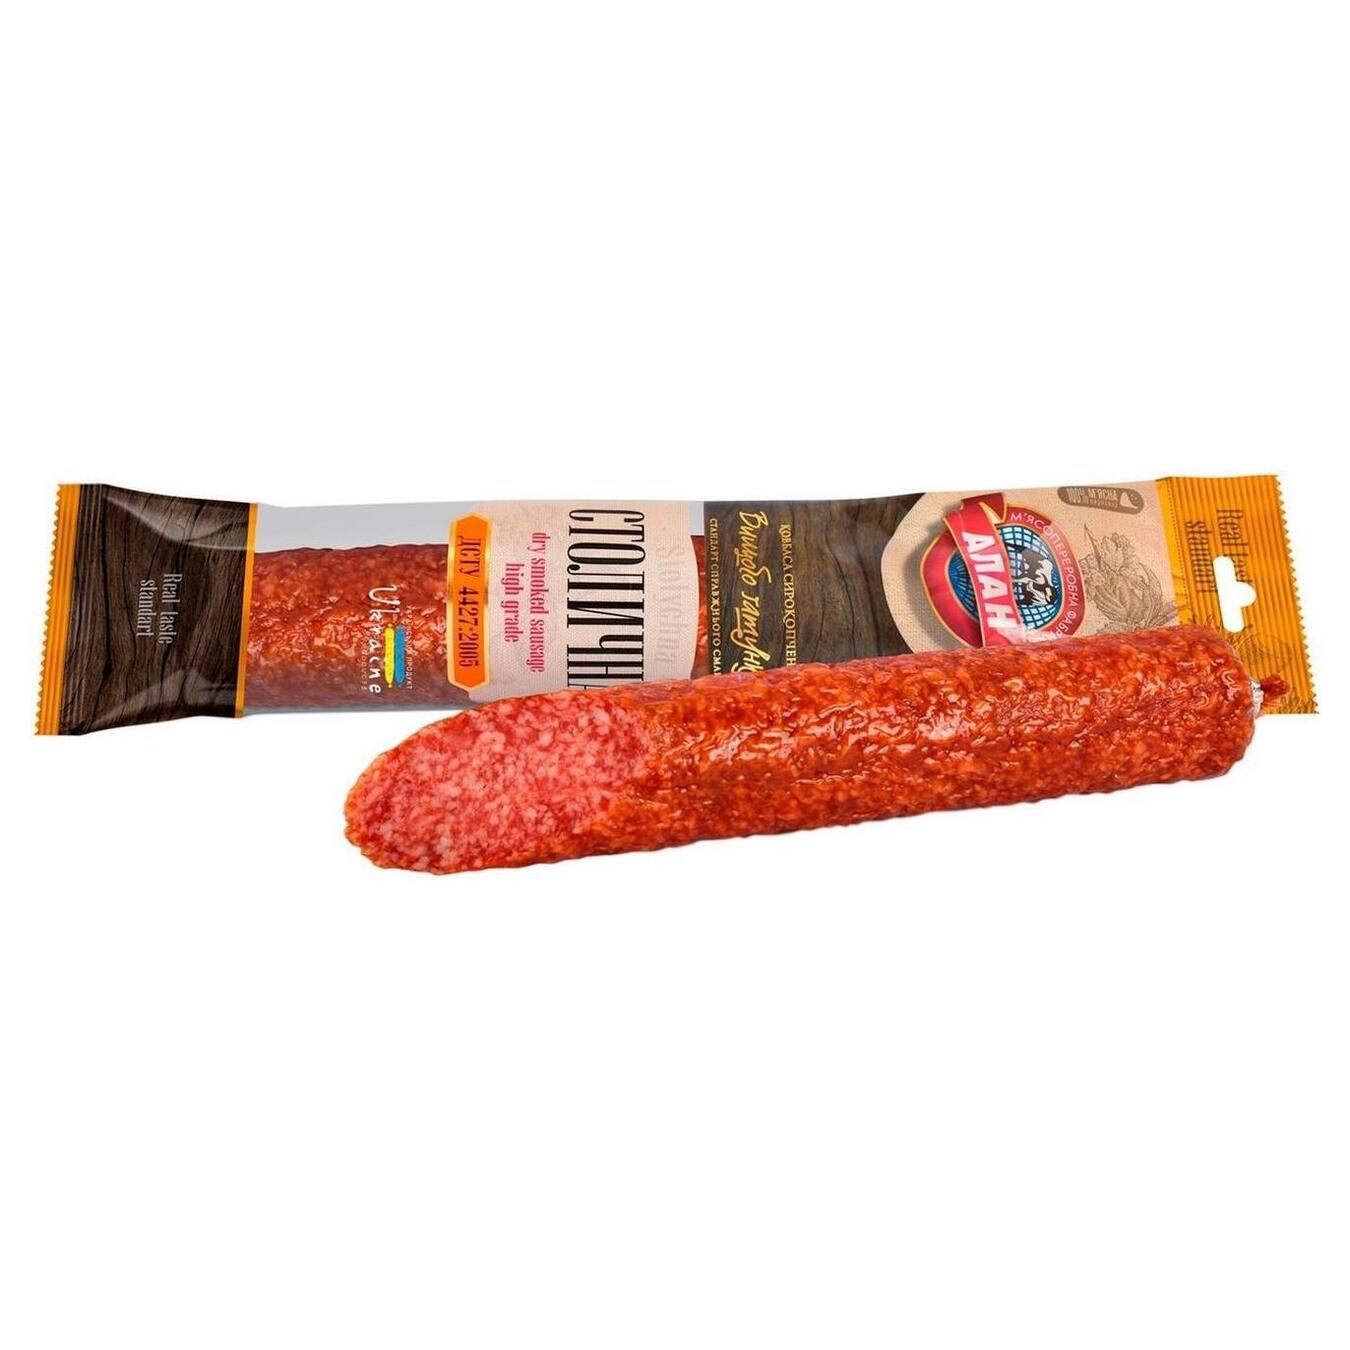 Boiled Alan Sausage Stolichna, the highest grade of weight